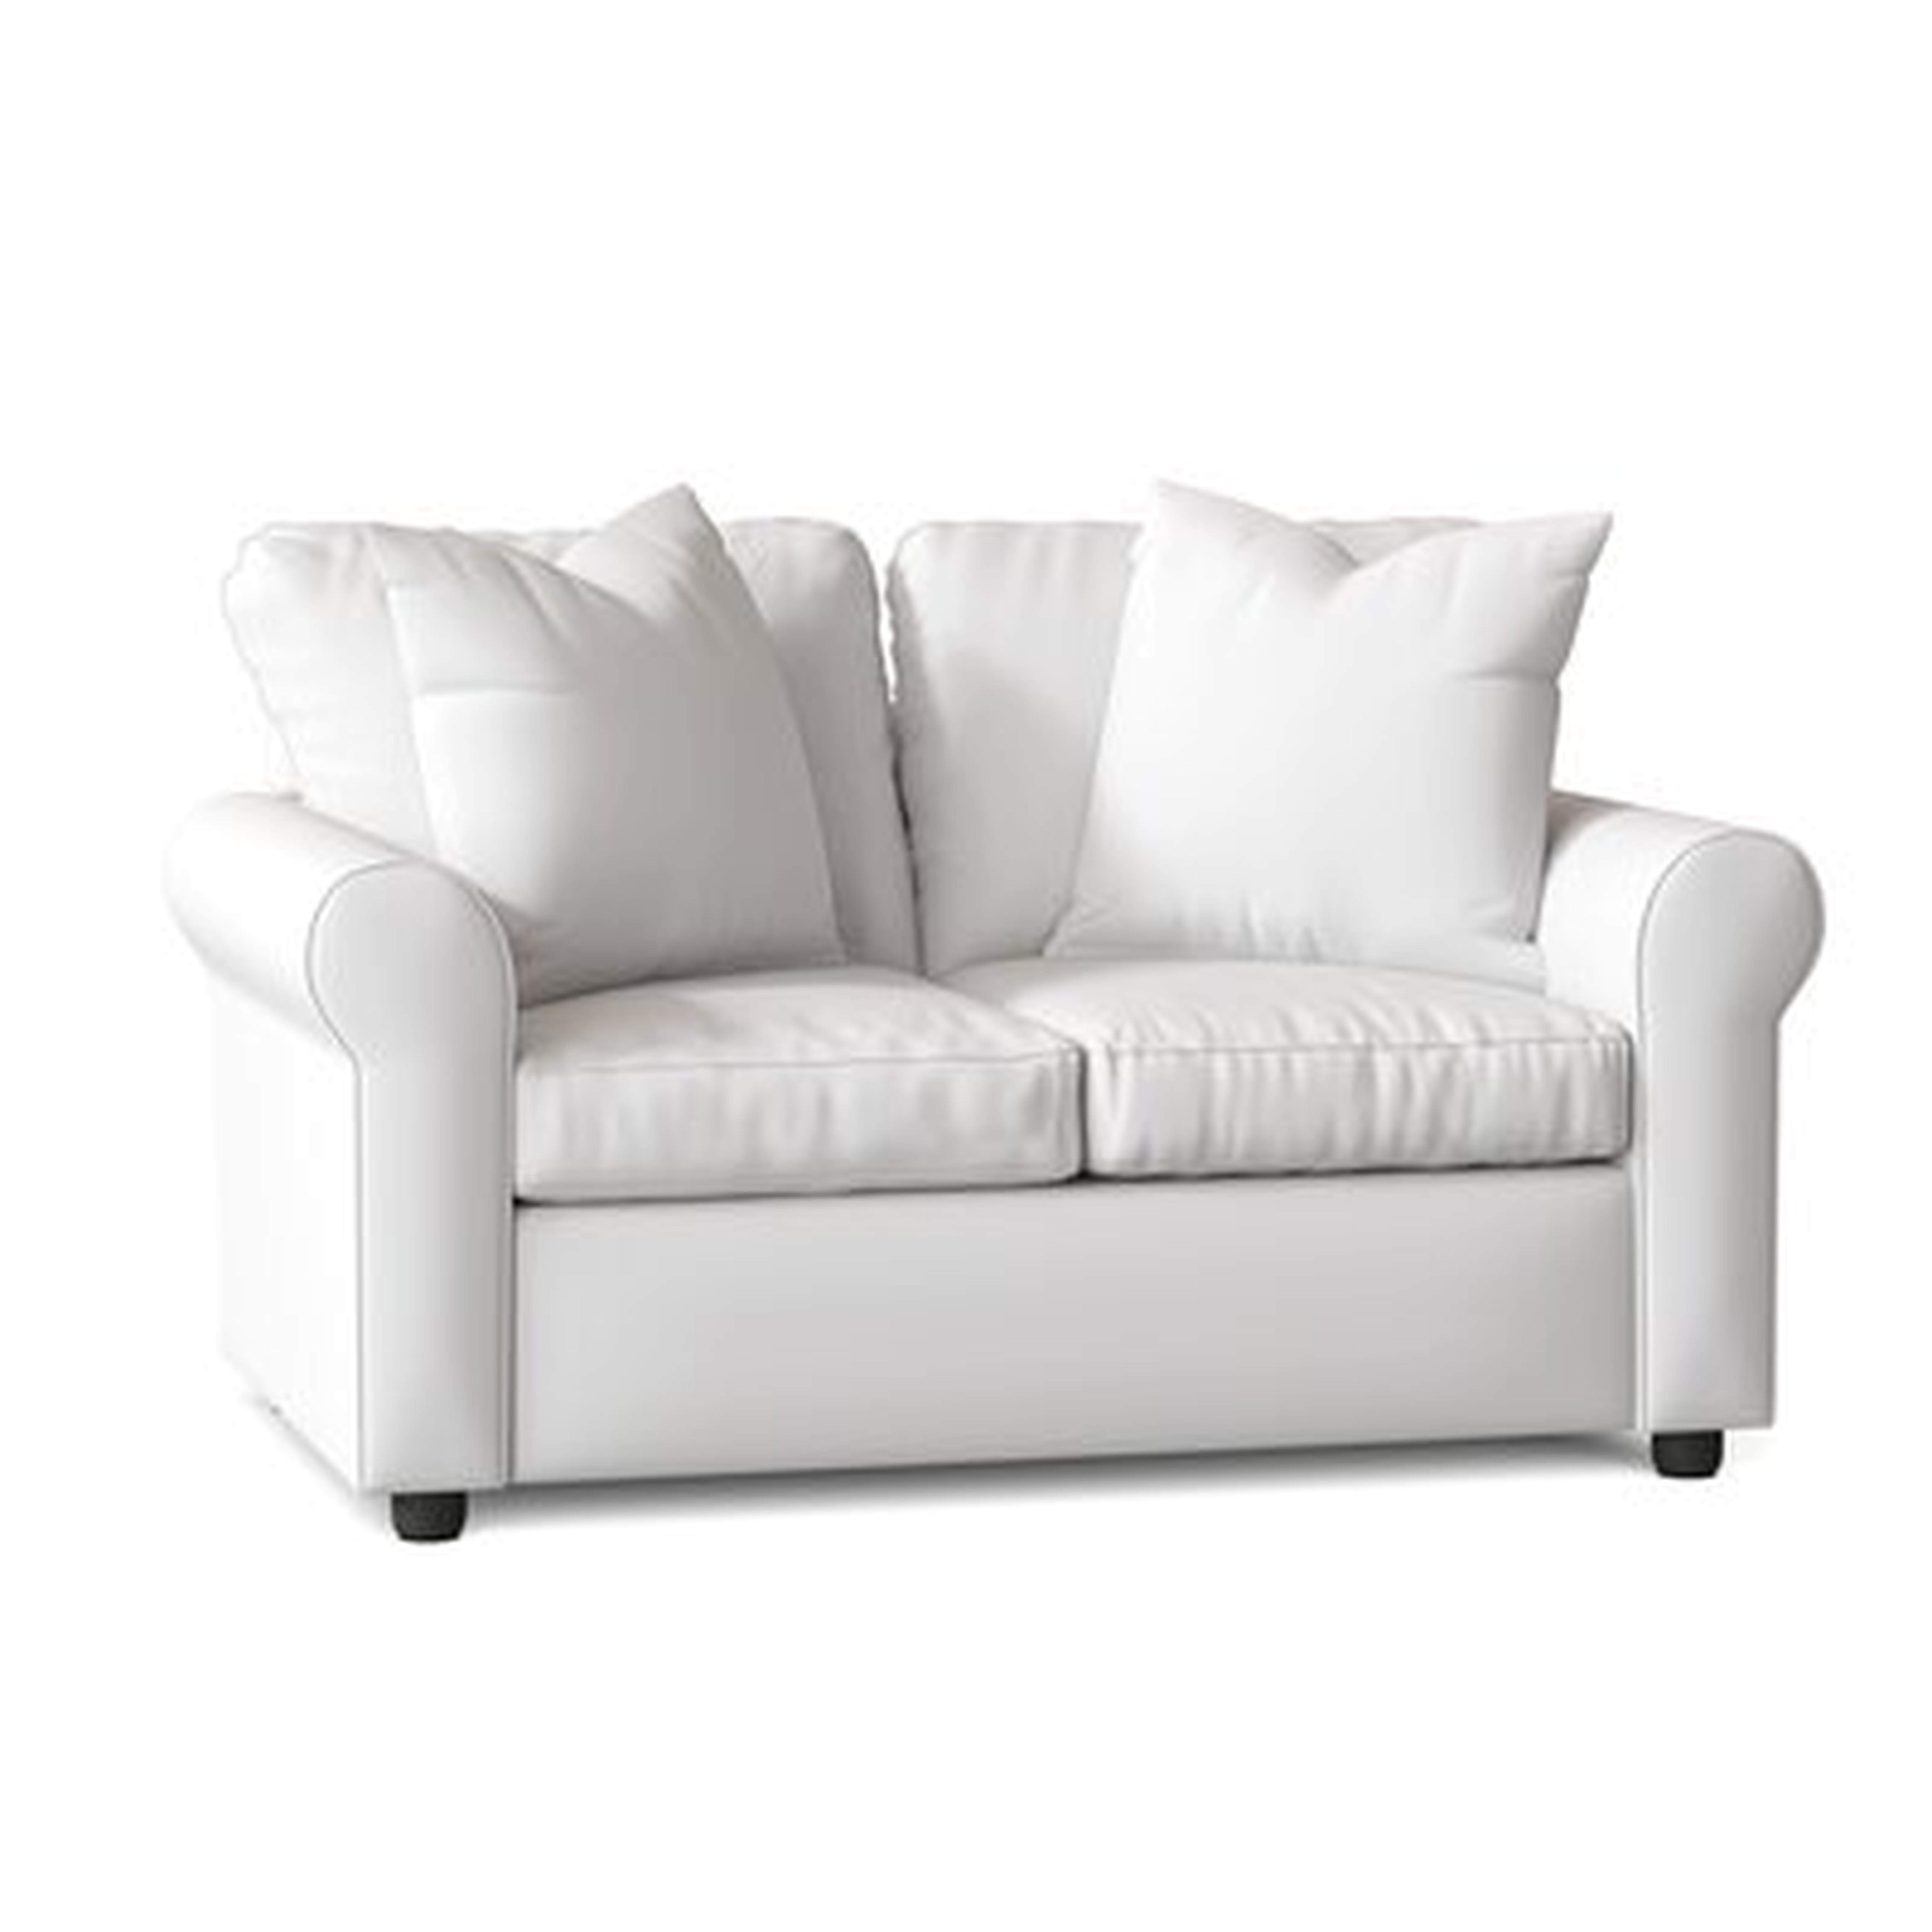 Wolsingham 60'' Rolled Arm Loveseat with Reversible Cushions, Spinnsol Optic White - Wayfair